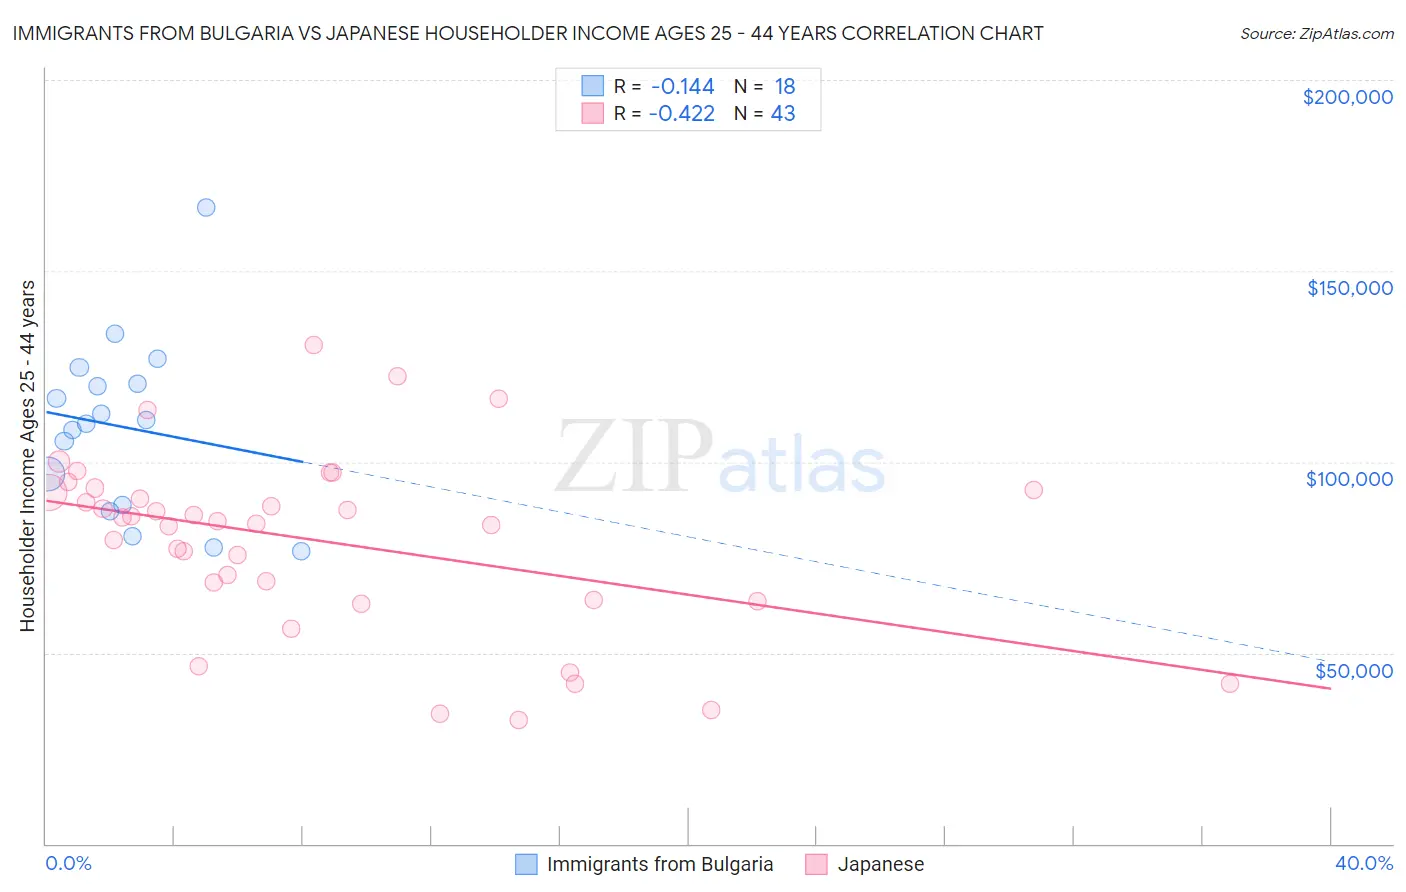 Immigrants from Bulgaria vs Japanese Householder Income Ages 25 - 44 years